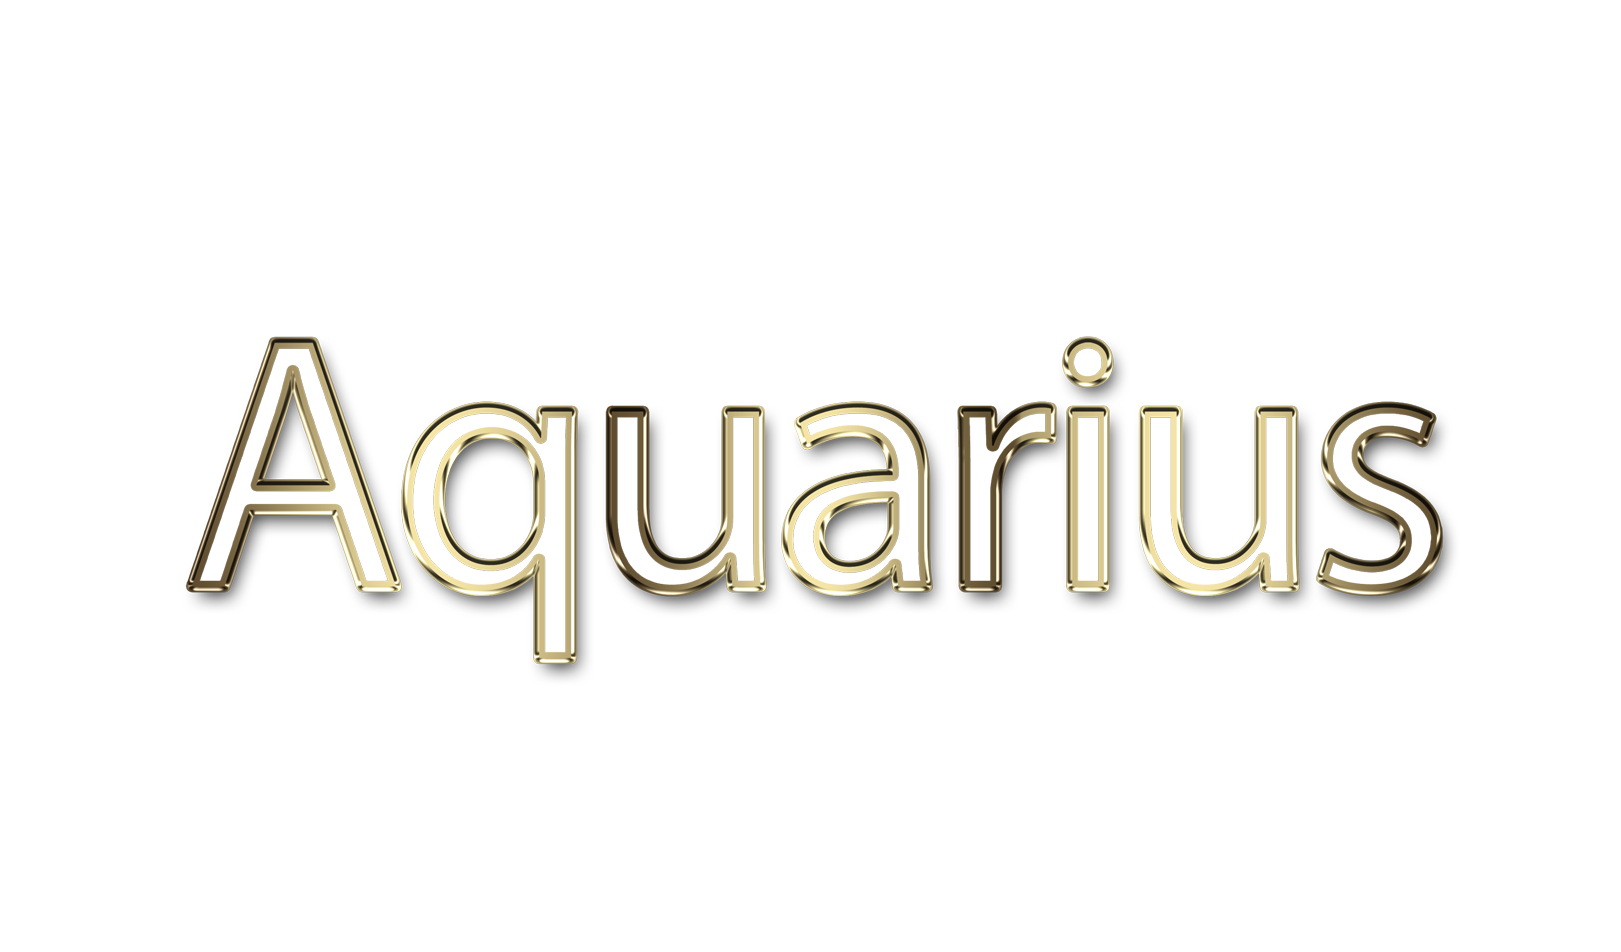 Aquarius png, word Aquarius png, Aquarius word png, Aquarius text png, Aquarius letters png, Aquarius word art typography PNG images, transparent png